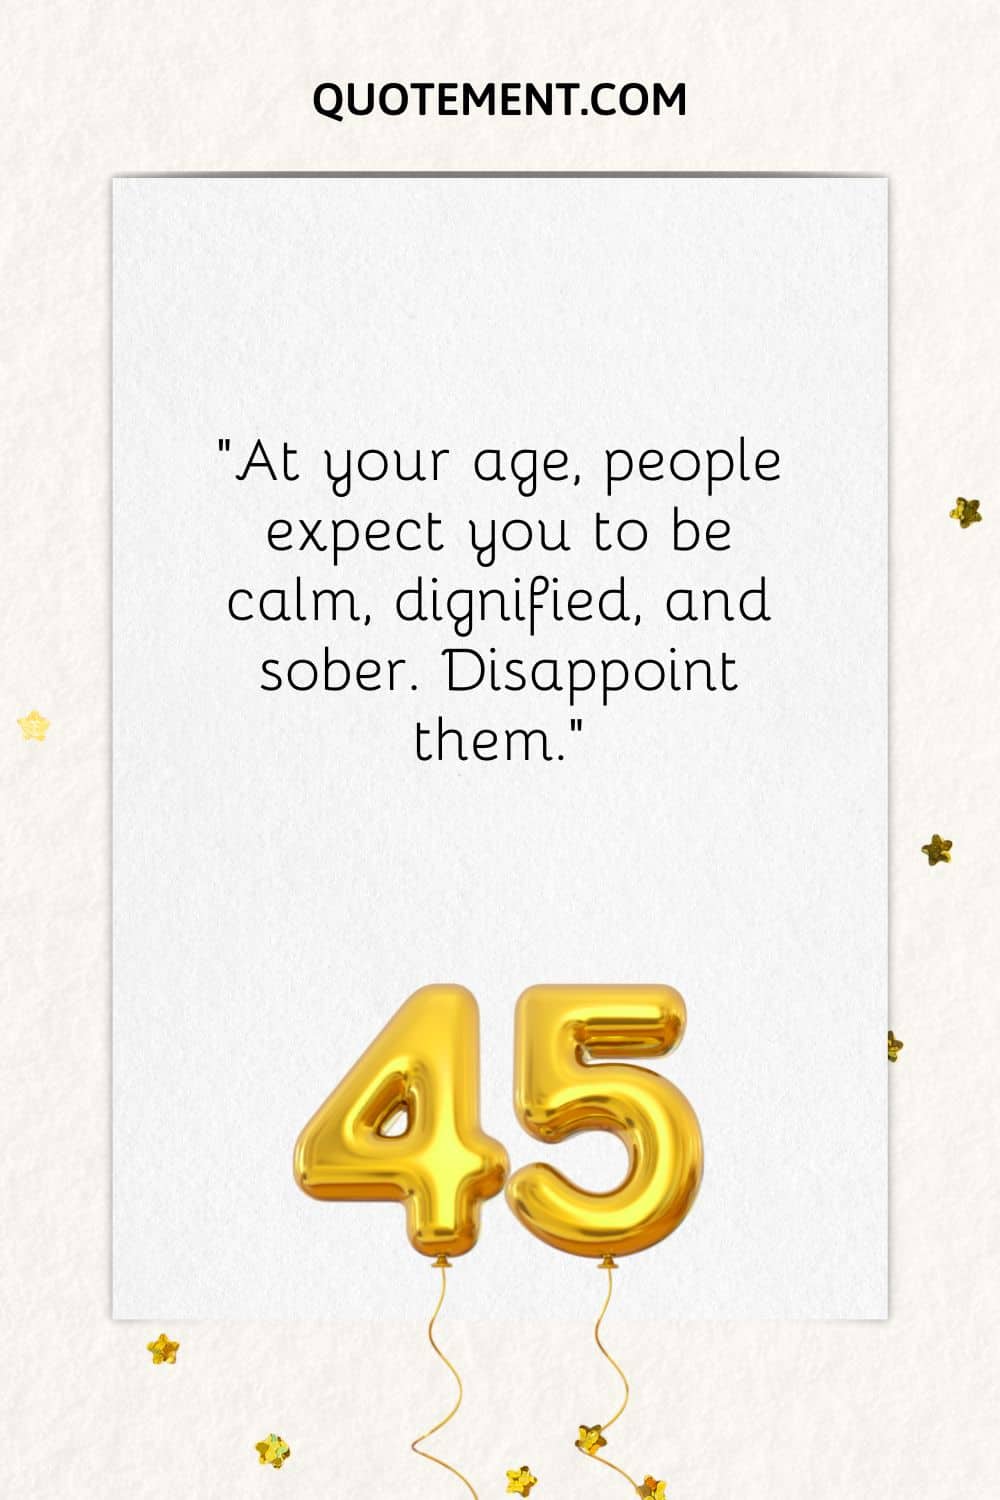 “At your age, people expect you to be calm, dignified, and sober. Disappoint them.”